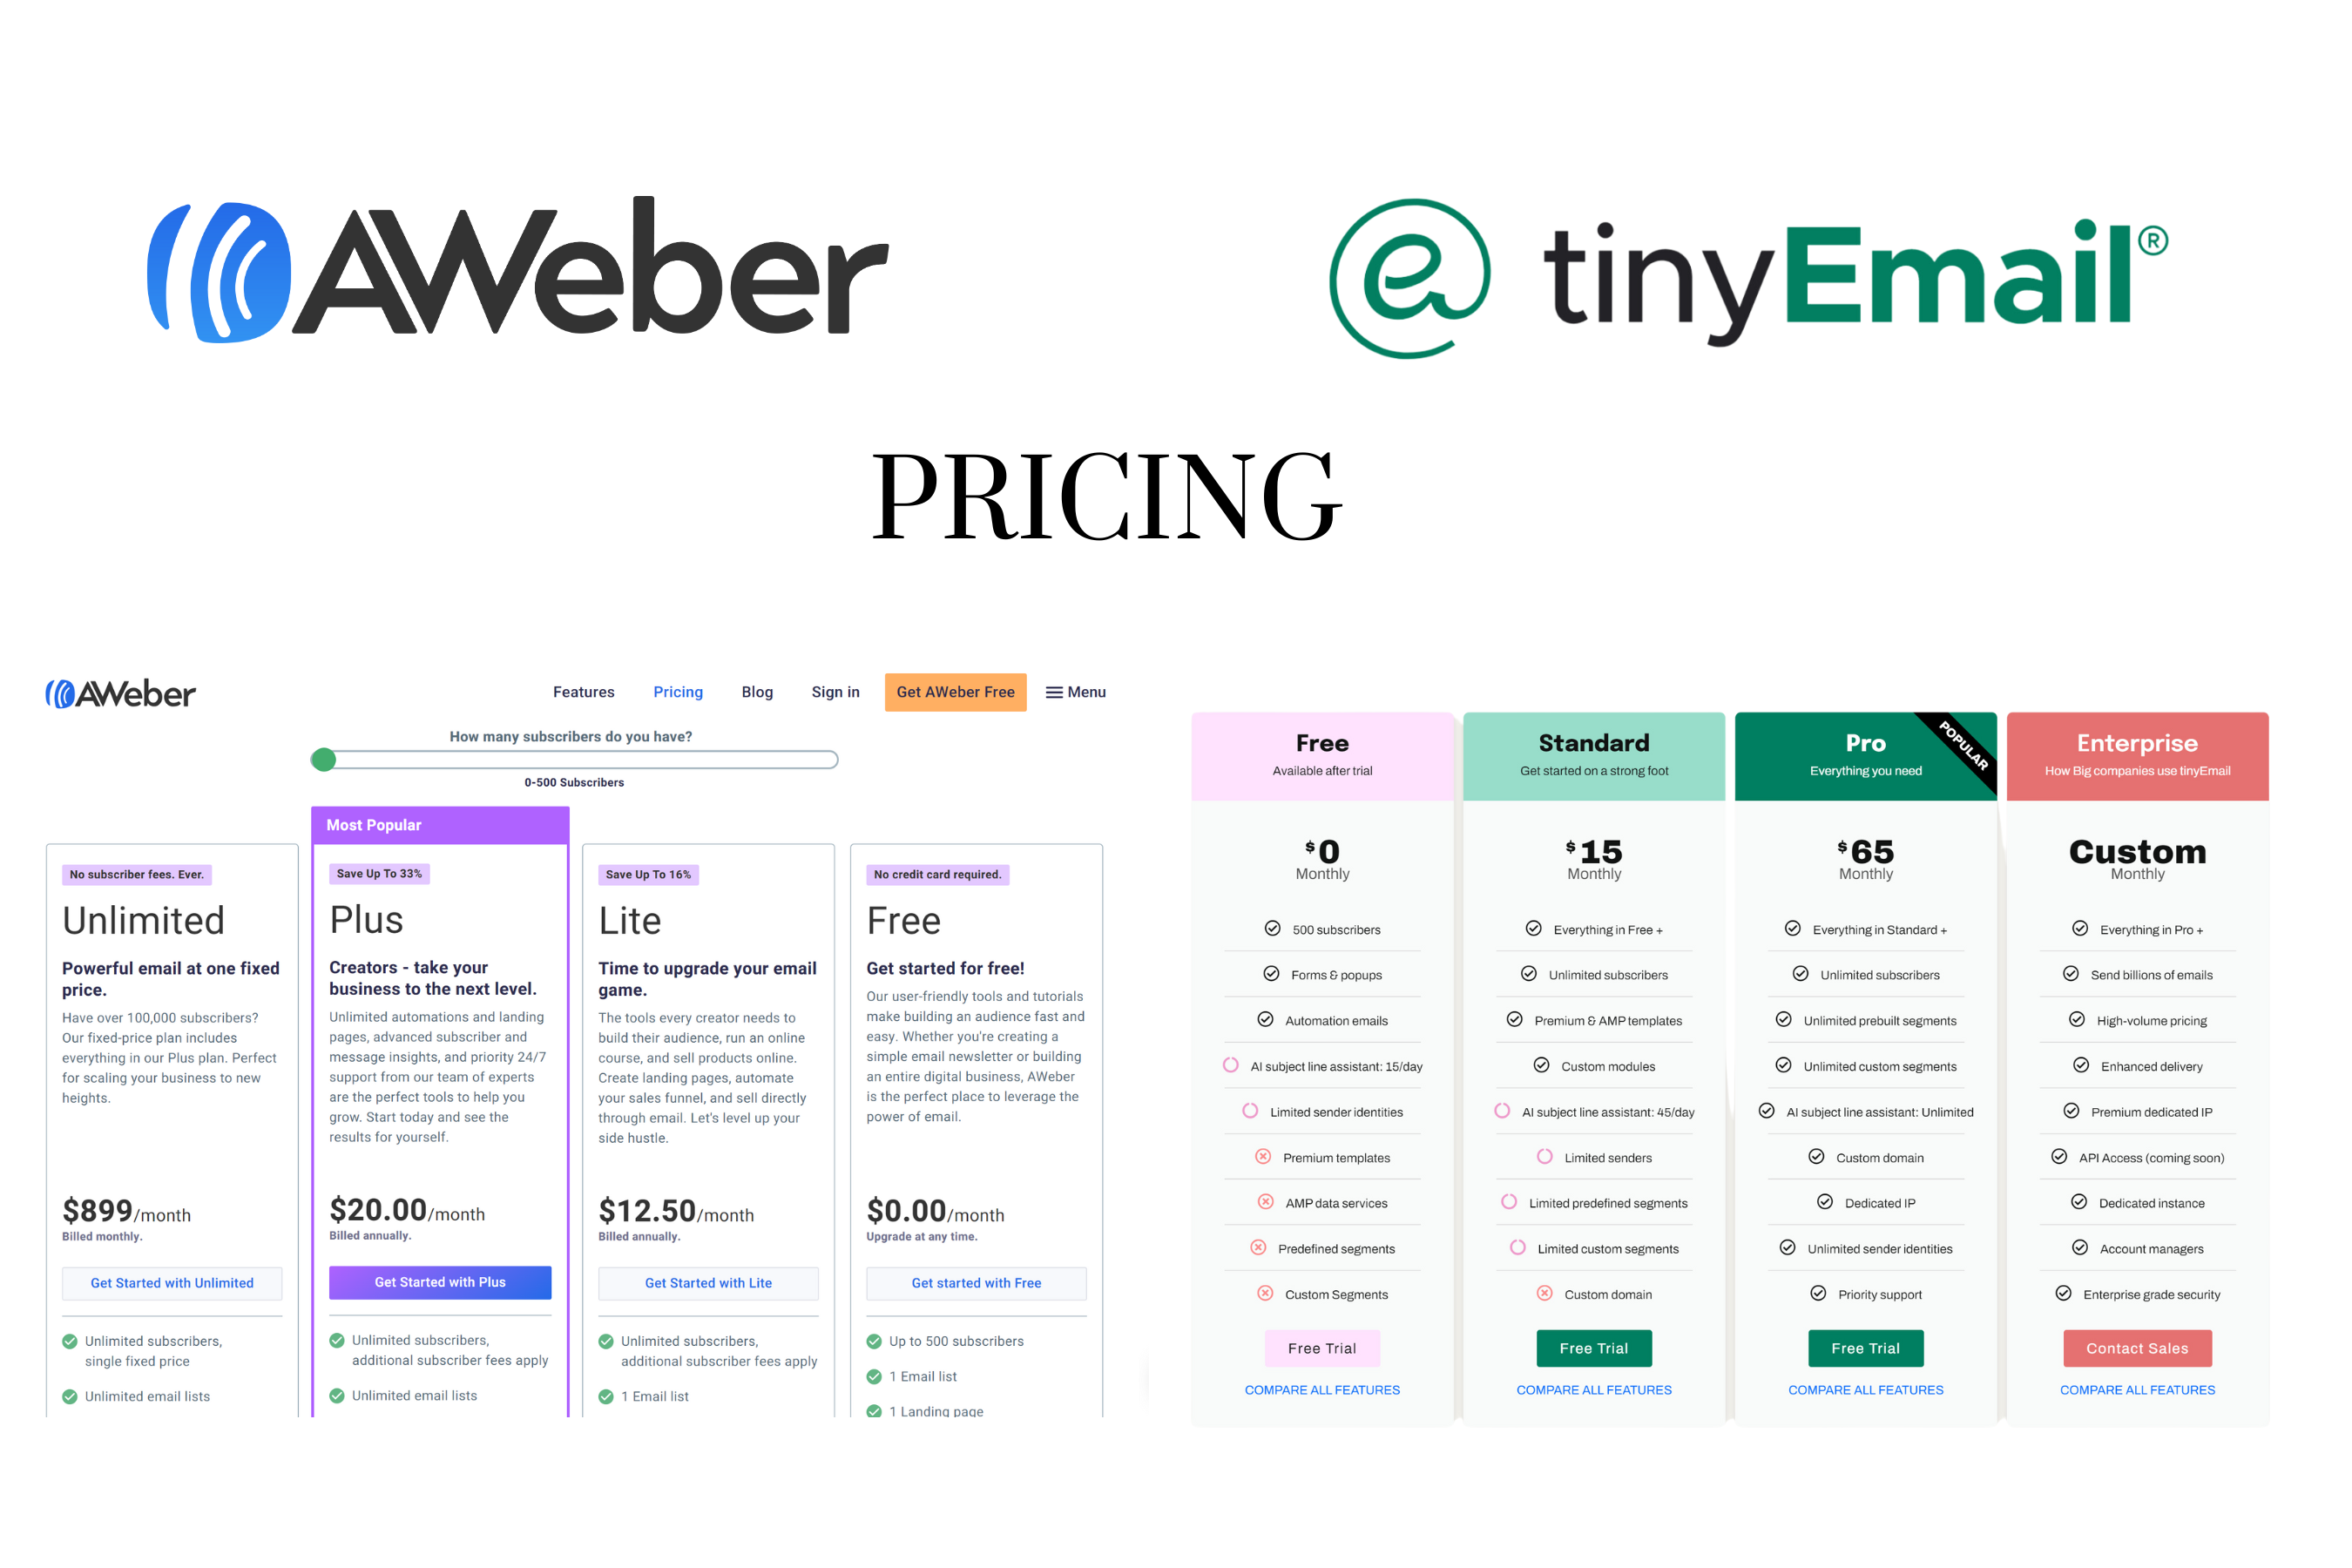 Aweber vs tinyEmail pricing.